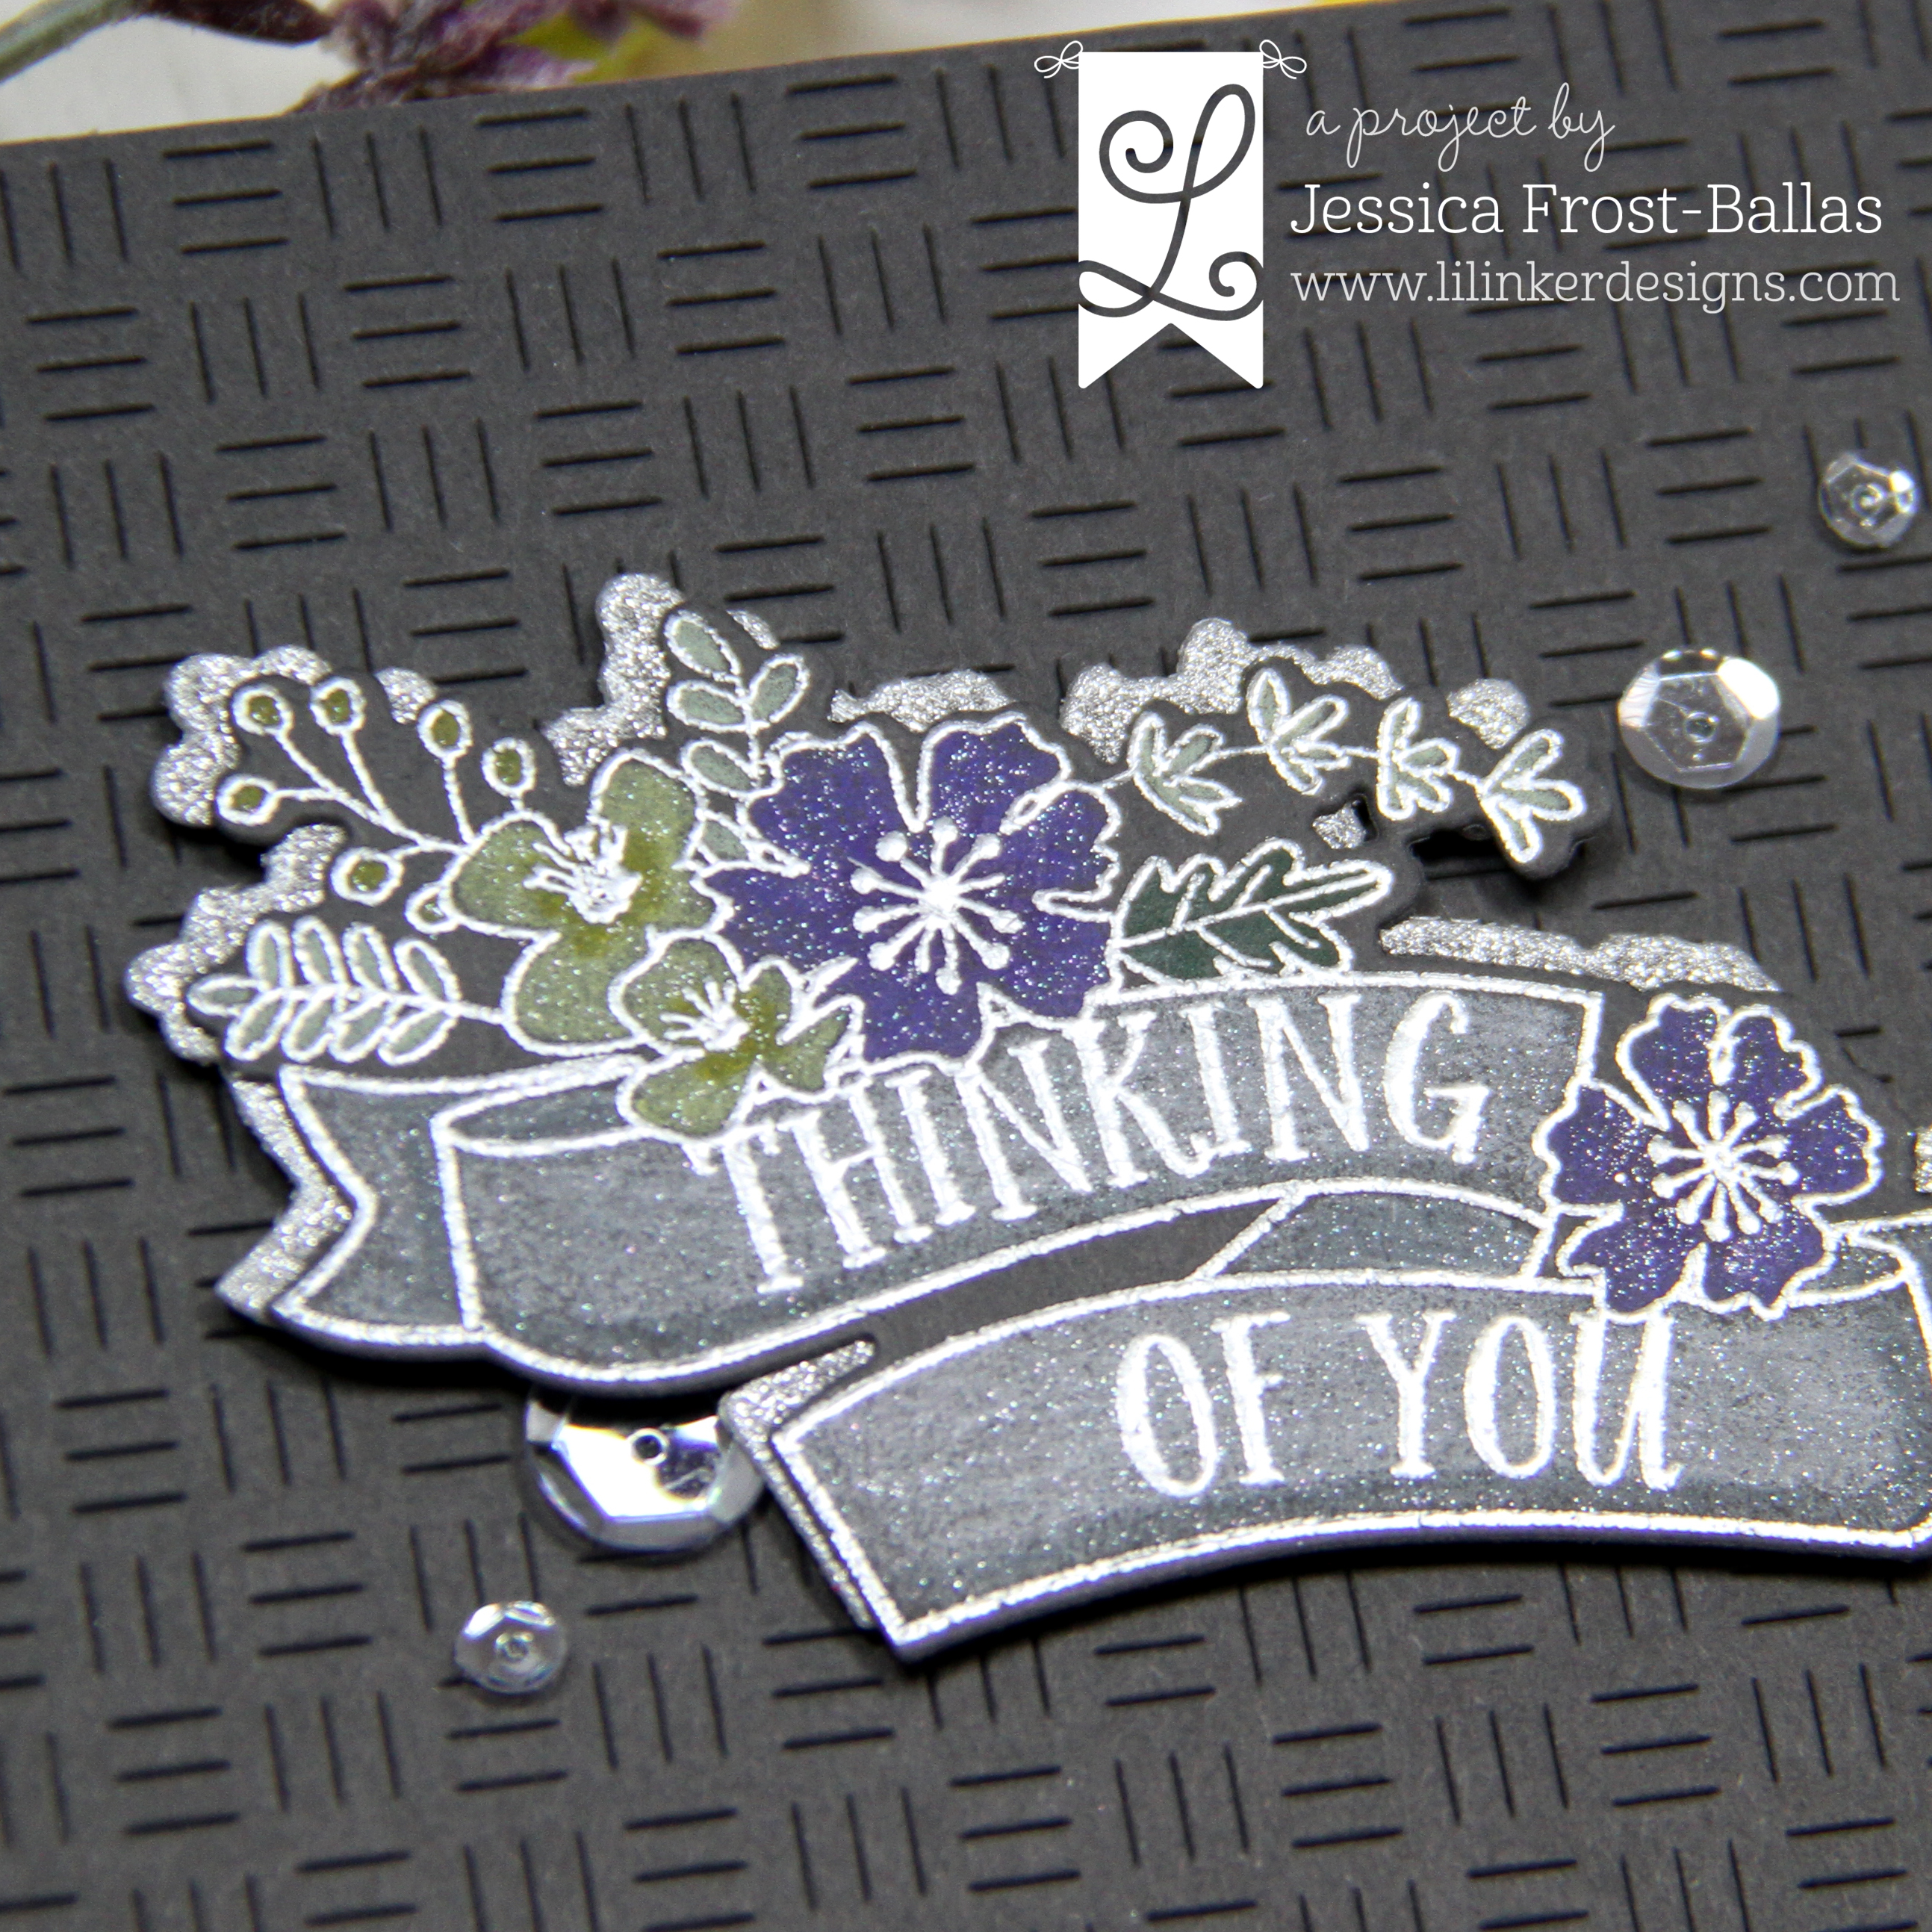 Thinking of You by Jessica Frost-Ballas for Lil' Inker Designs